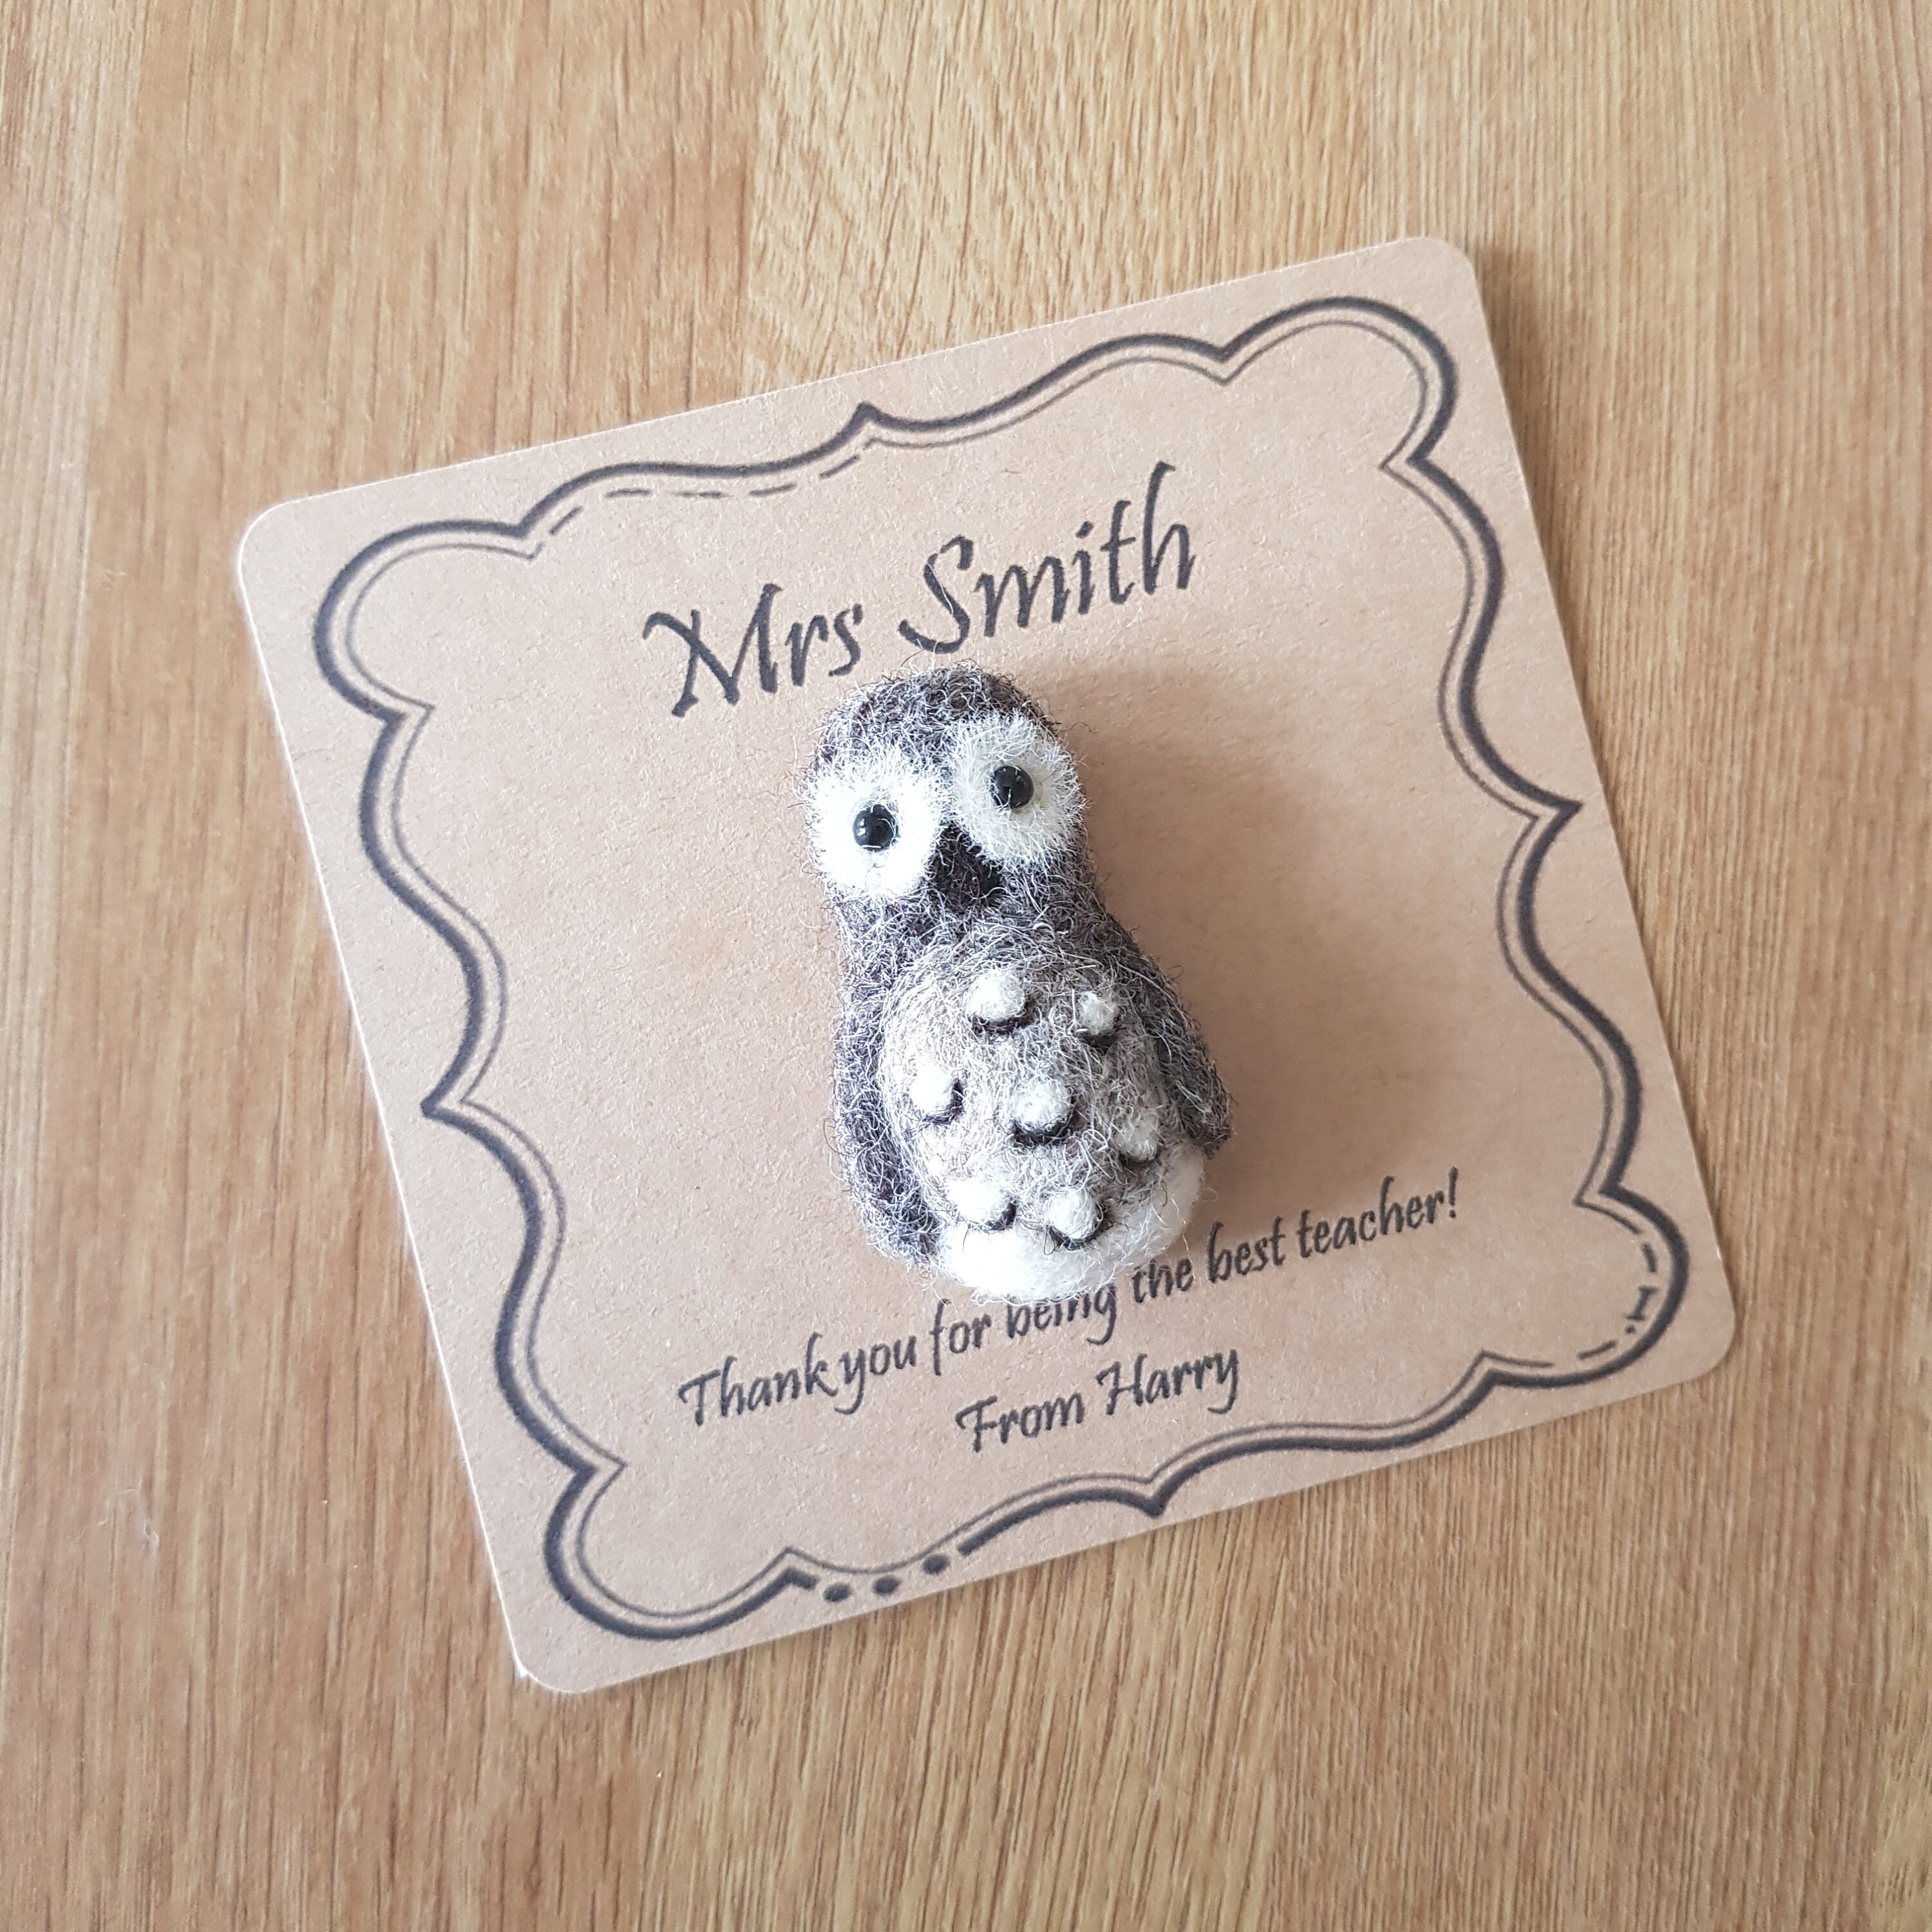 Personalised Gift Needle Felted Owl Brooch Handmade in Natural Jacobs & Merino Wool With Glass Eyes. Felt Pin